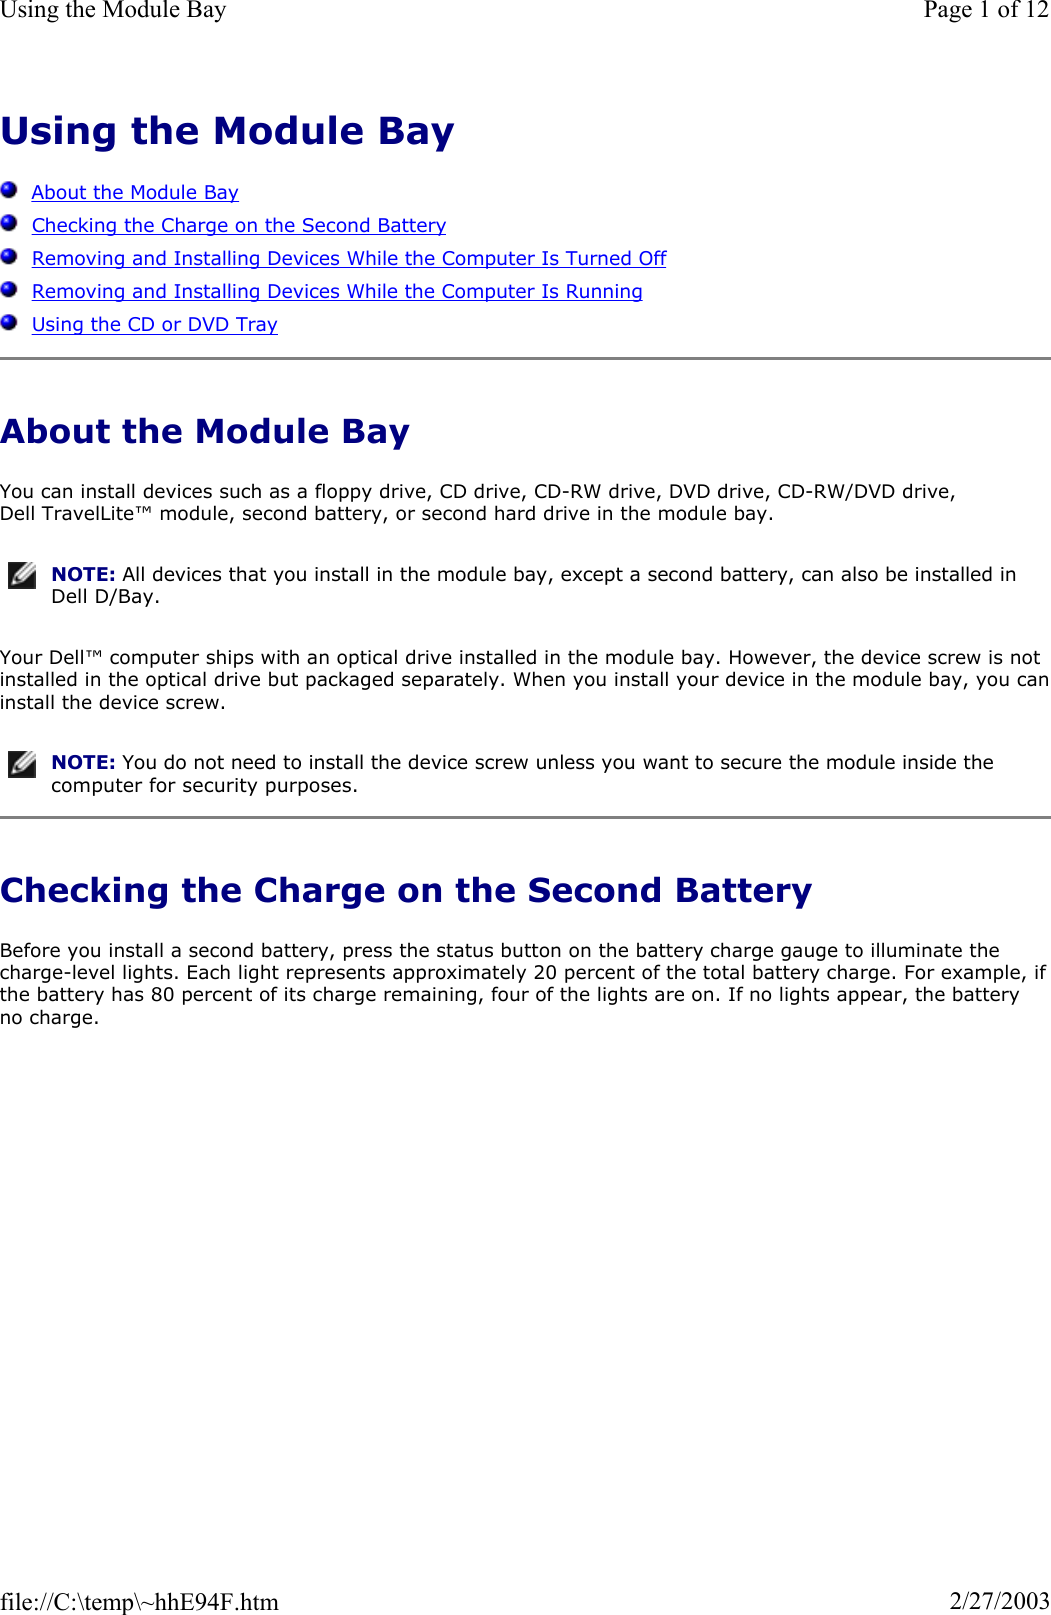 Using the Module BayAbout the Module BayChecking the Charge on the Second BatteryRemoving and Installing Devices While the Computer Is Turned OffRemoving and Installing Devices While the Computer Is RunningUsing the CD or DVD TrayAbout the Module Bay You can install devices such as a floppy drive, CD drive, CD-RW drive, DVD drive, CD-RW/DVD drive, Dell TravelLite™ module, second battery, or second hard drive in the module bay. Your Dell™ computer ships with an optical drive installed in the module bay. However, the device screw is not installed in the optical drive but packaged separately. When you install your device in the module bay, you caninstall the device screw. Checking the Charge on the Second Battery Before you install a second battery, press the status button on the battery charge gauge to illuminate the charge-level lights. Each light represents approximately 20 percent of the total battery charge. For example, ifthe battery has 80 percent of its charge remaining, four of the lights are on. If no lights appear, the battery no charge. NOTE: All devices that you install in the module bay, except a second battery, can also be installed in Dell D/Bay.NOTE: You do not need to install the device screw unless you want to secure the module inside the computer for security purposes.Page 1 of 12Using the Module Bay2/27/2003file://C:\temp\~hhE94F.htm